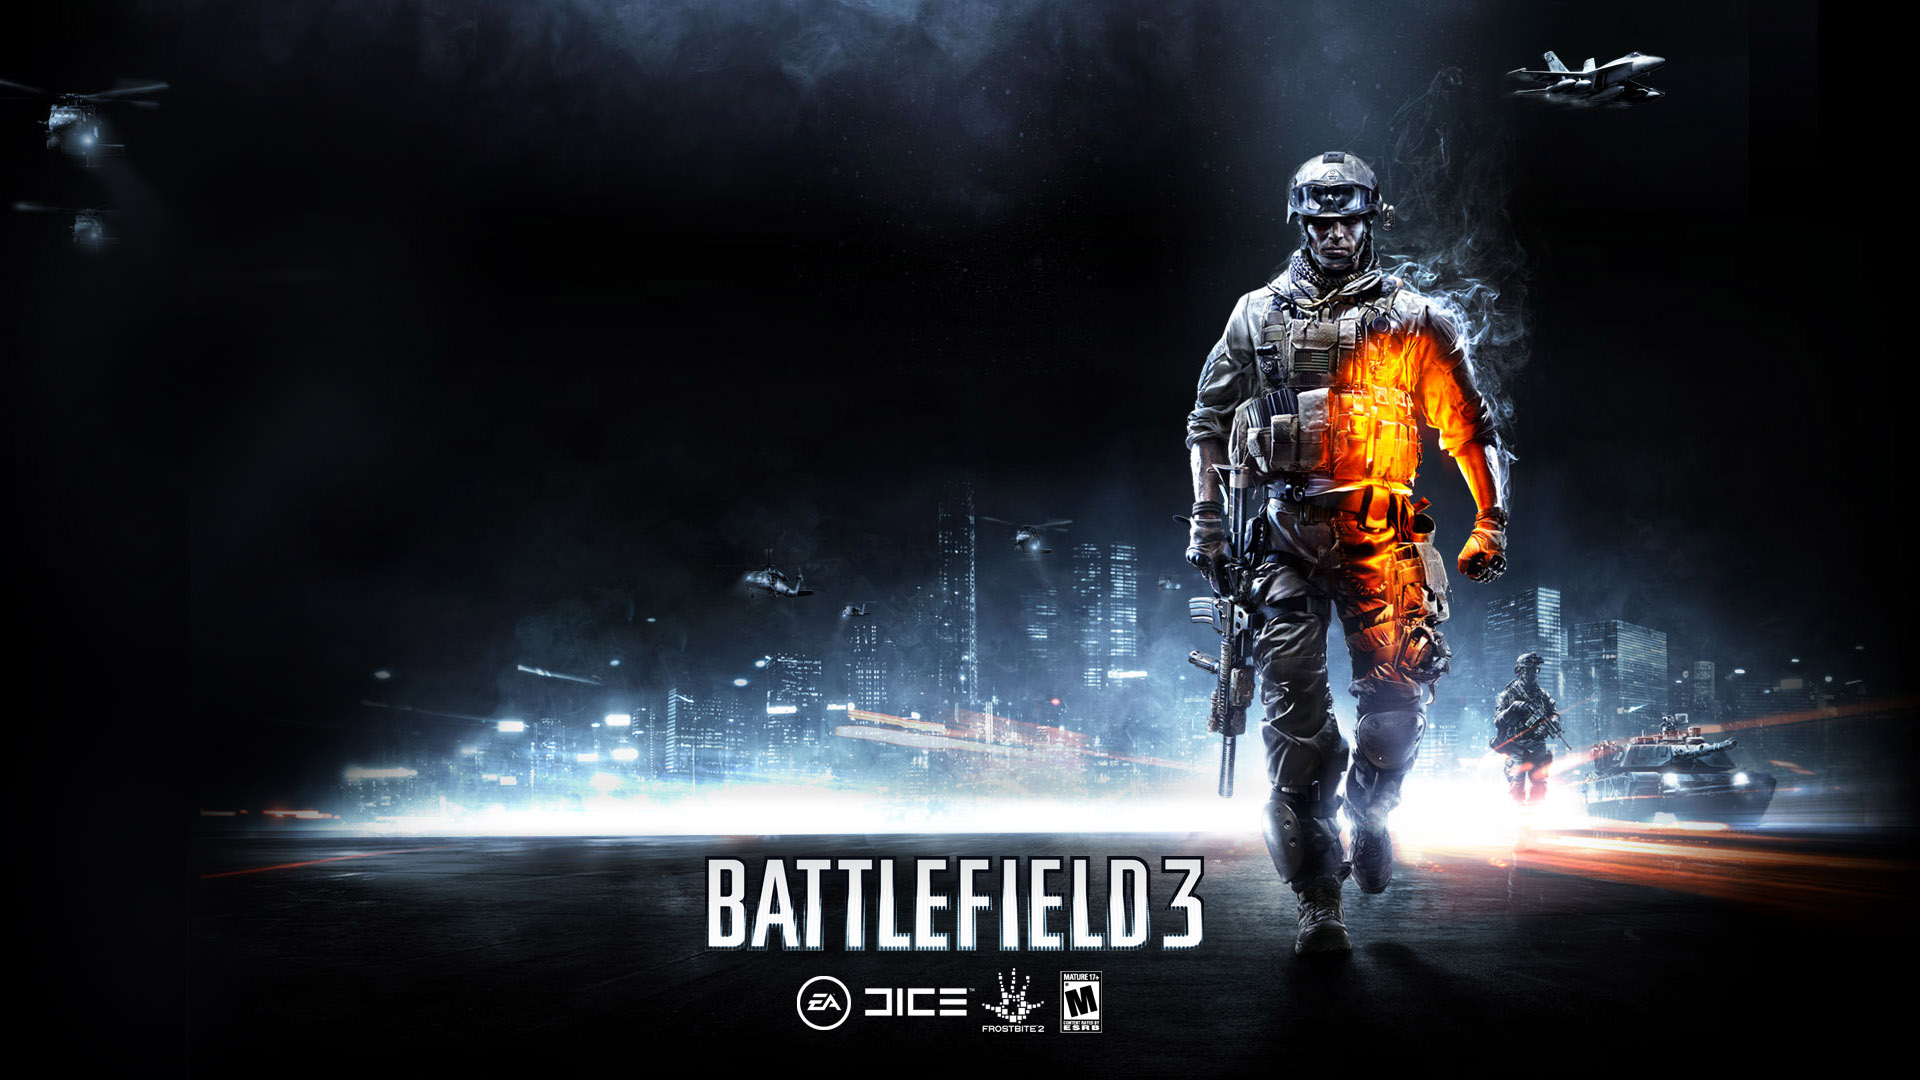 free download battlefield 3 xbox 360 playstation 3 pc game 1920x1080 for your desktop mobile tablet explore 46 xbox 360 wallpaper downloads download wallpaper for xbox one xbox 360 wallpapers free halo xbox 360 wallpapers download battlefield 3 xbox 360 playstation 3